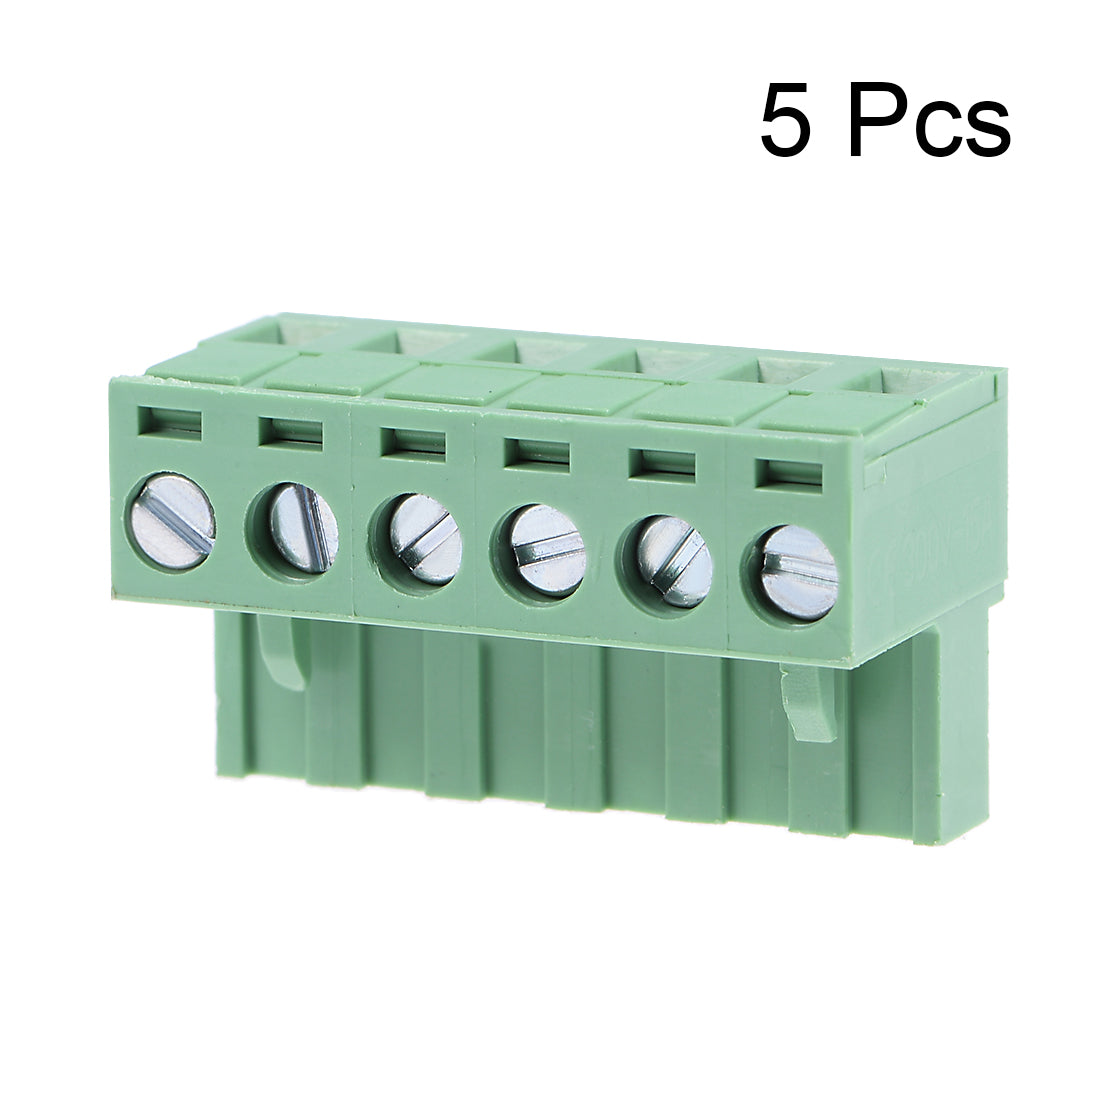 uxcell Uxcell 5Pcs AC300V 15A 5.08mm Pitch 6P Flat Angle Needle Seat Insert-In PCB Terminal Block Connector green